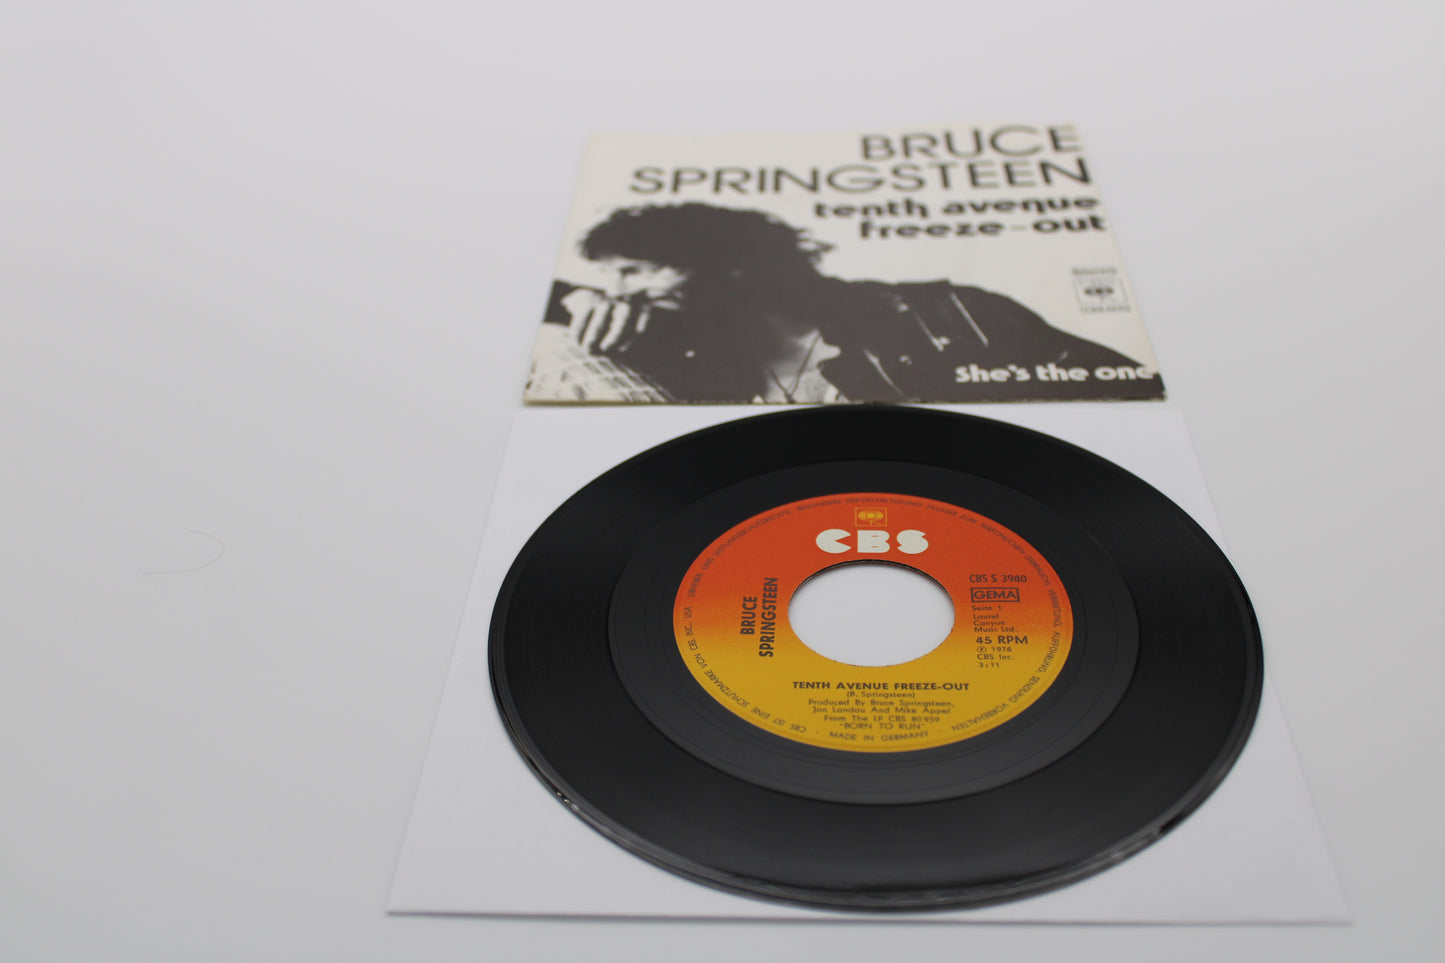 Bruce Springsteen 45 Record 7" Vinyl  Tenth Avenue Freeze Out & She's the One 1976 German Import Collectible